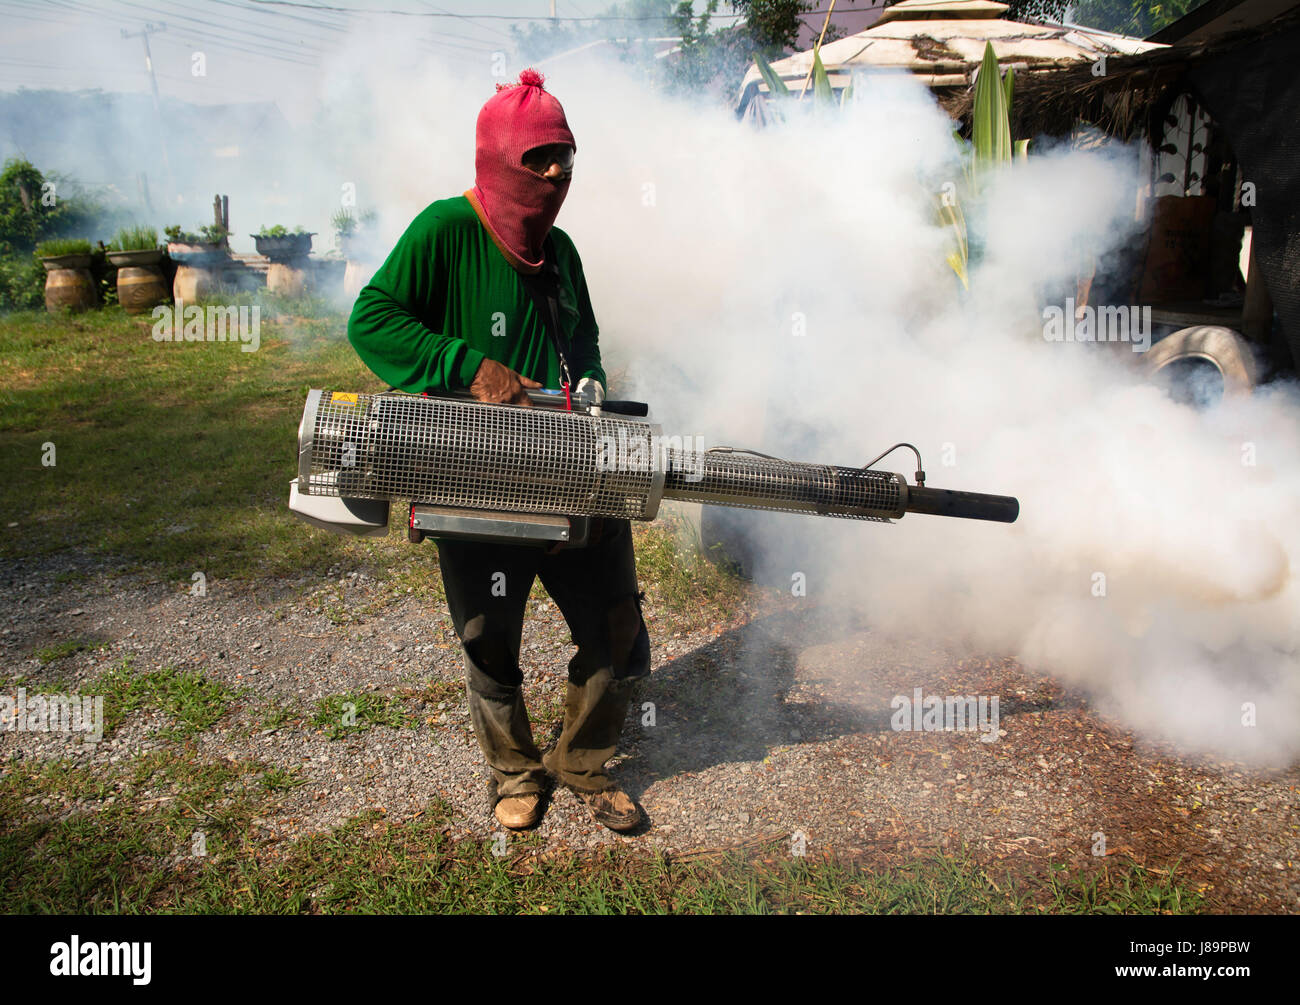 Man work fogging to eliminate mosquito for preventing spread dengue fever in Thailand. Stock Photo